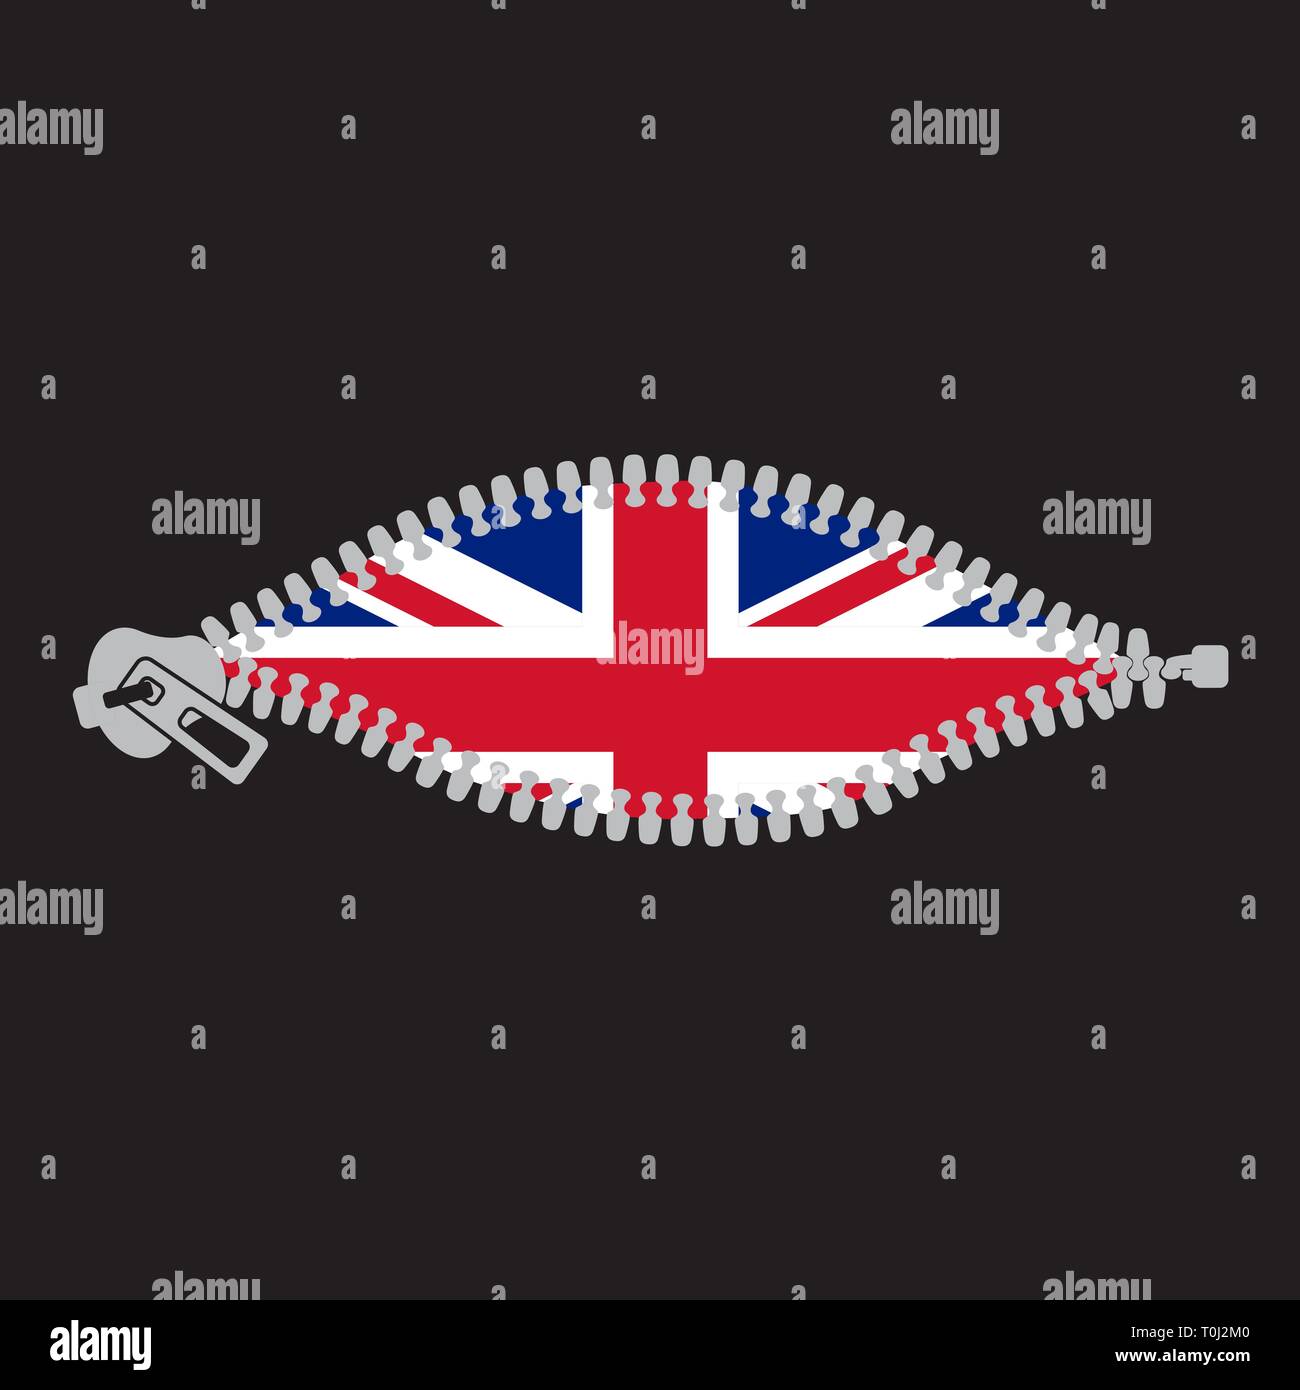 Opened zipper revealing United Kingdom of Great Britain flag Stock Vector